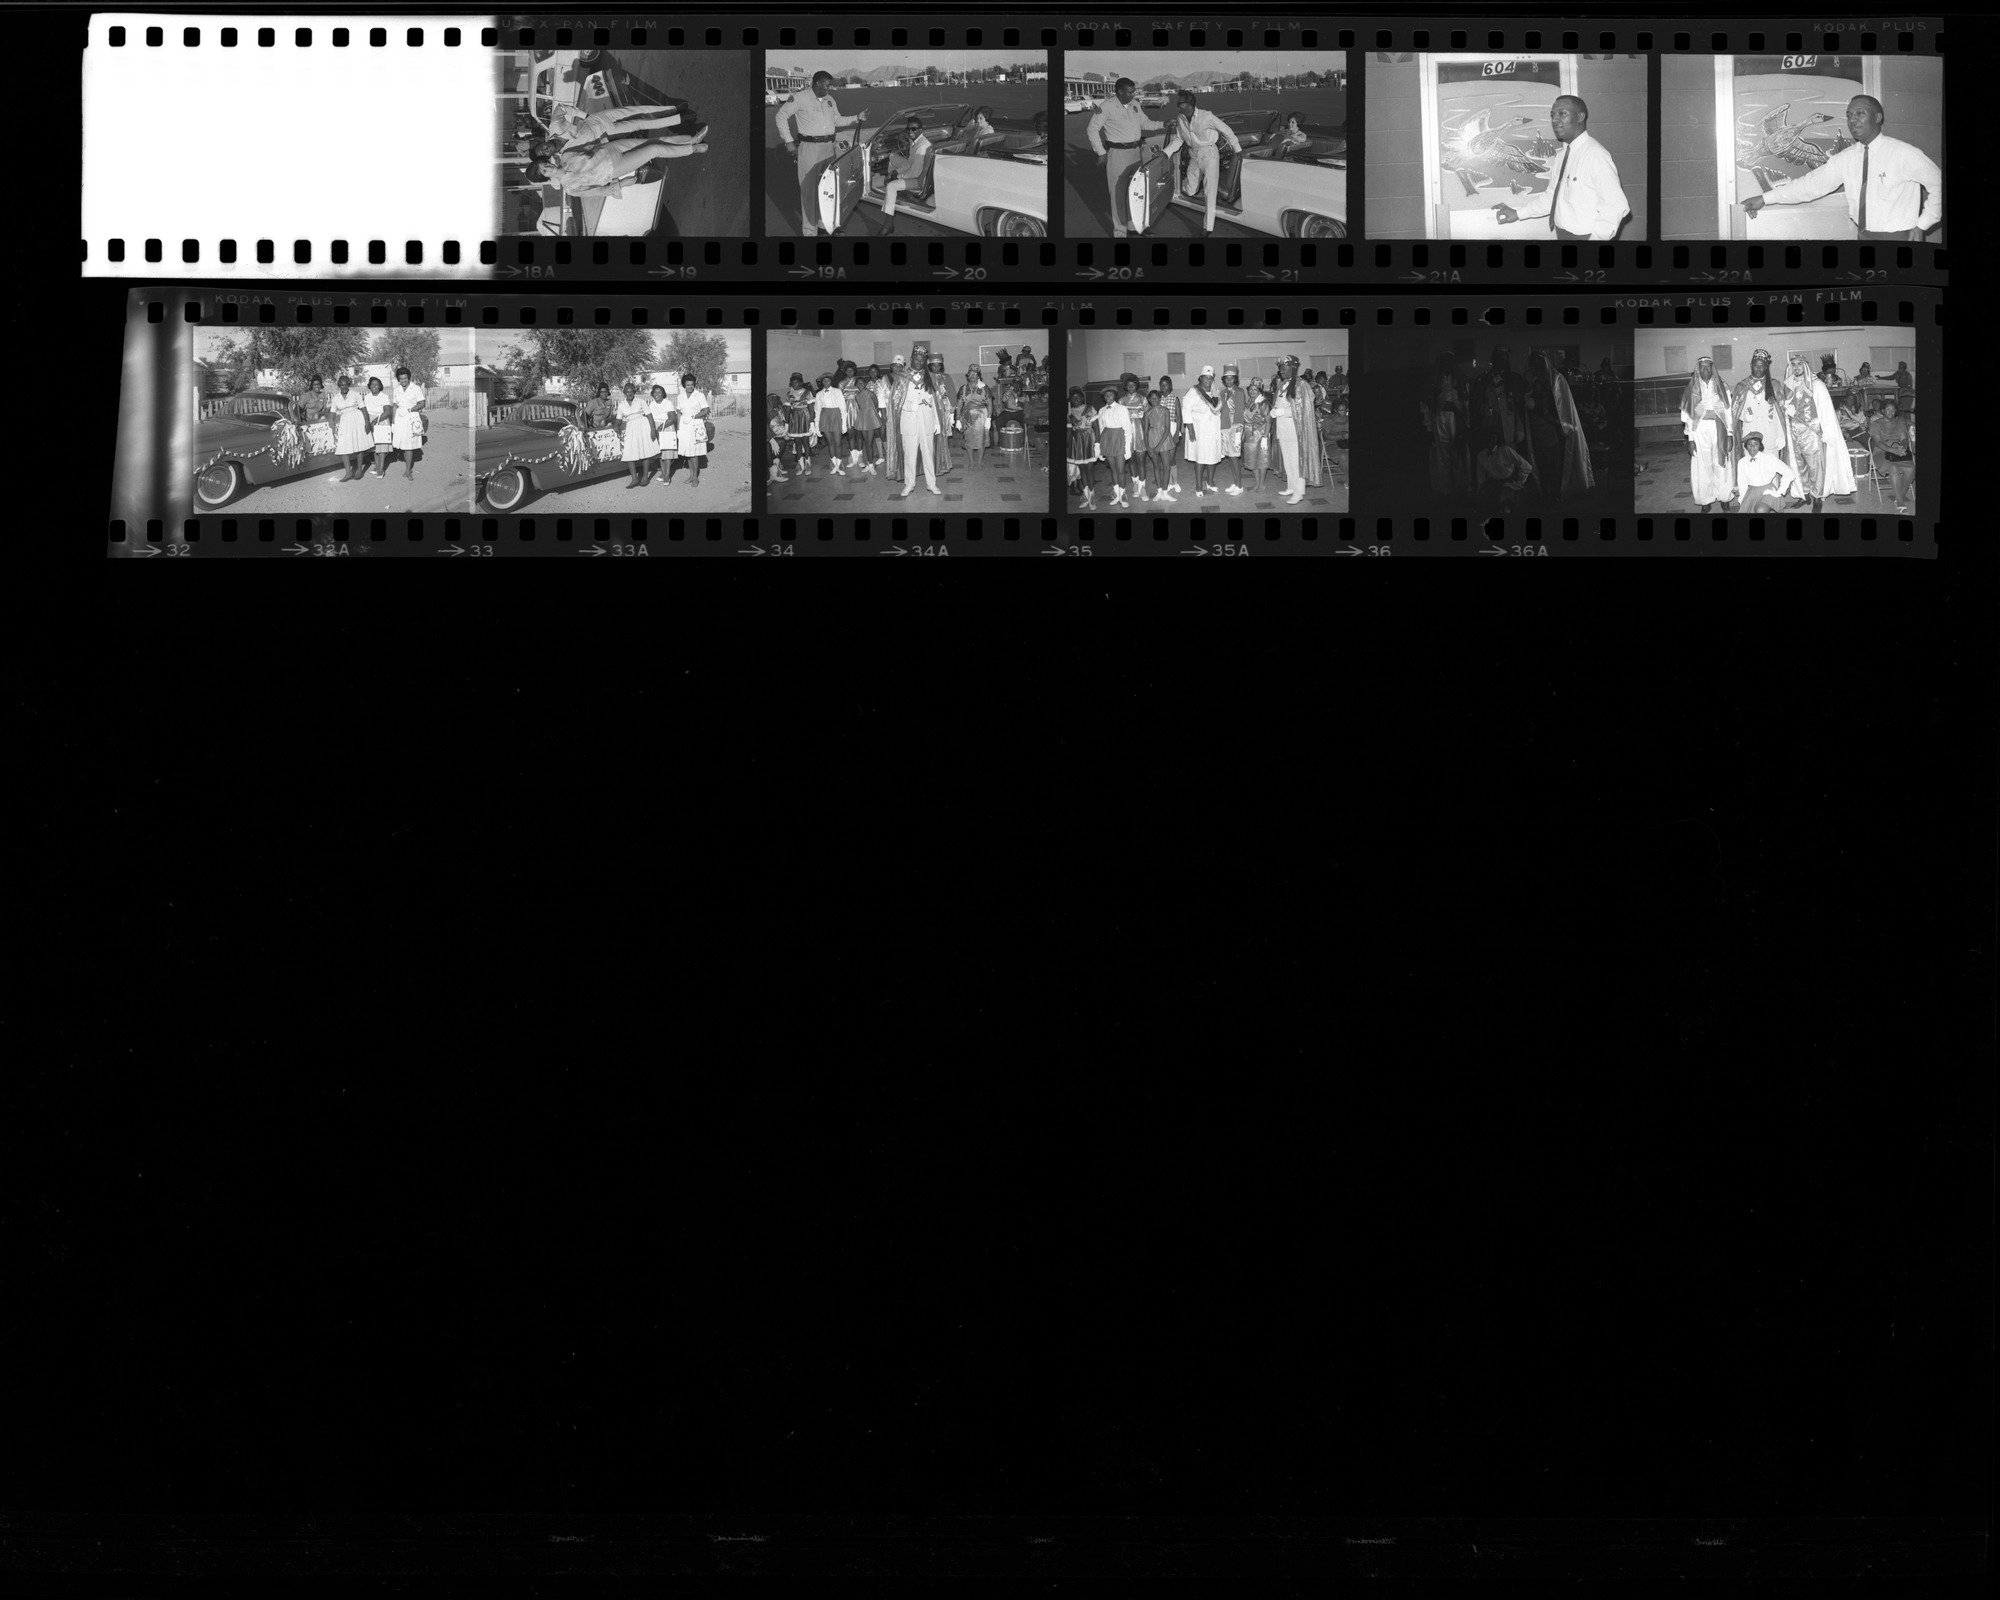 Set of negatives by Clinton Wright including Doris Tina Bond's baby, Happy Times Girls at Ellen's, Minnie Wilkins painting, Shrines Conclave, Lonnie Lawson Sam, and Wild Goose advertisement, 1966, page 2